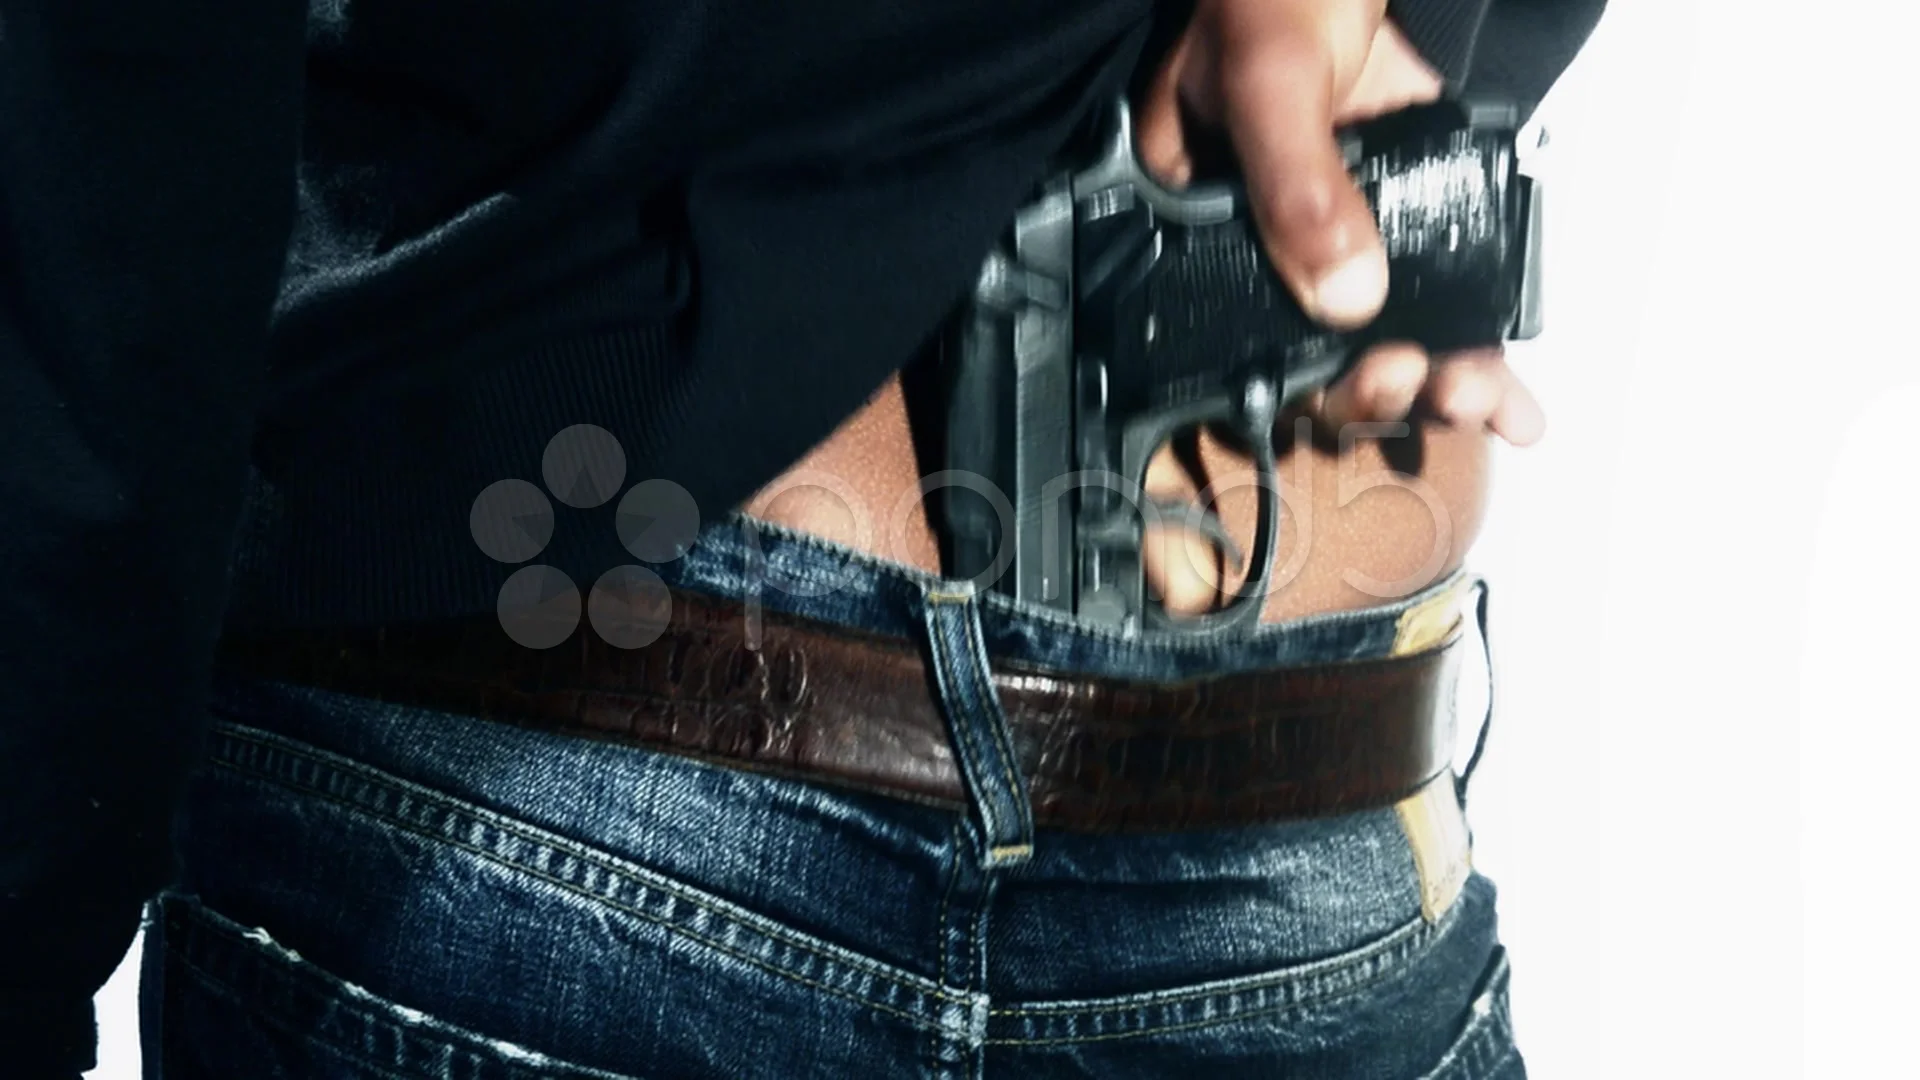 Mans Back With Gun Tucked In Pants Video Clip 38566682